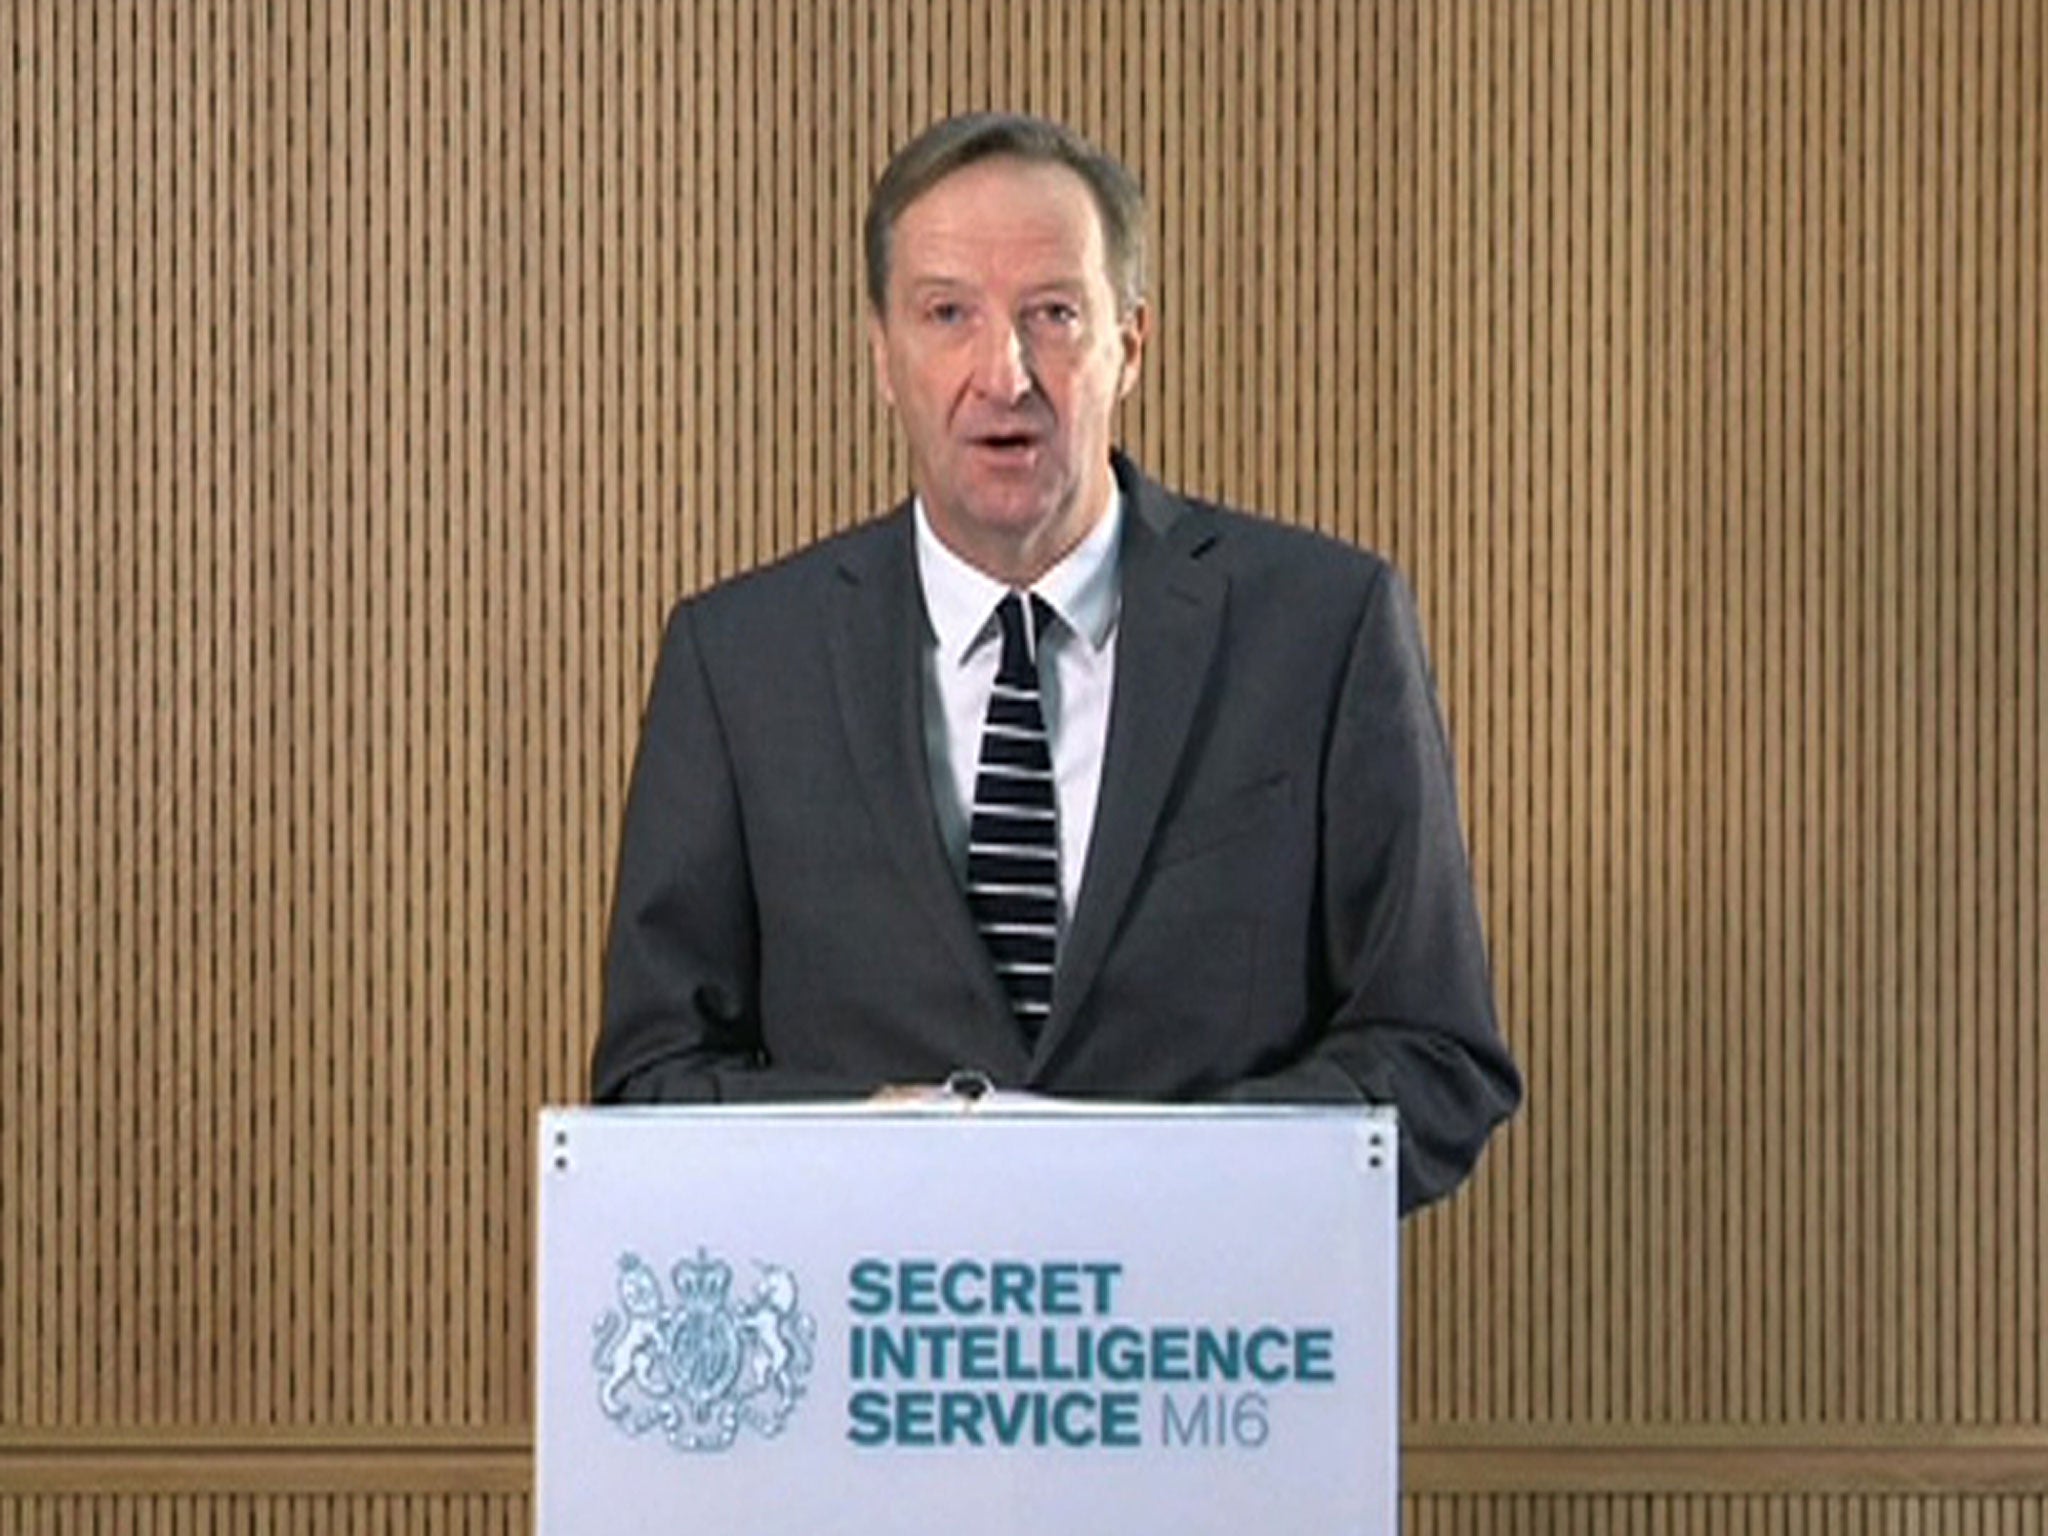 Sir Alex Younger said the incident showed Israel was using ‘systematic targeting’